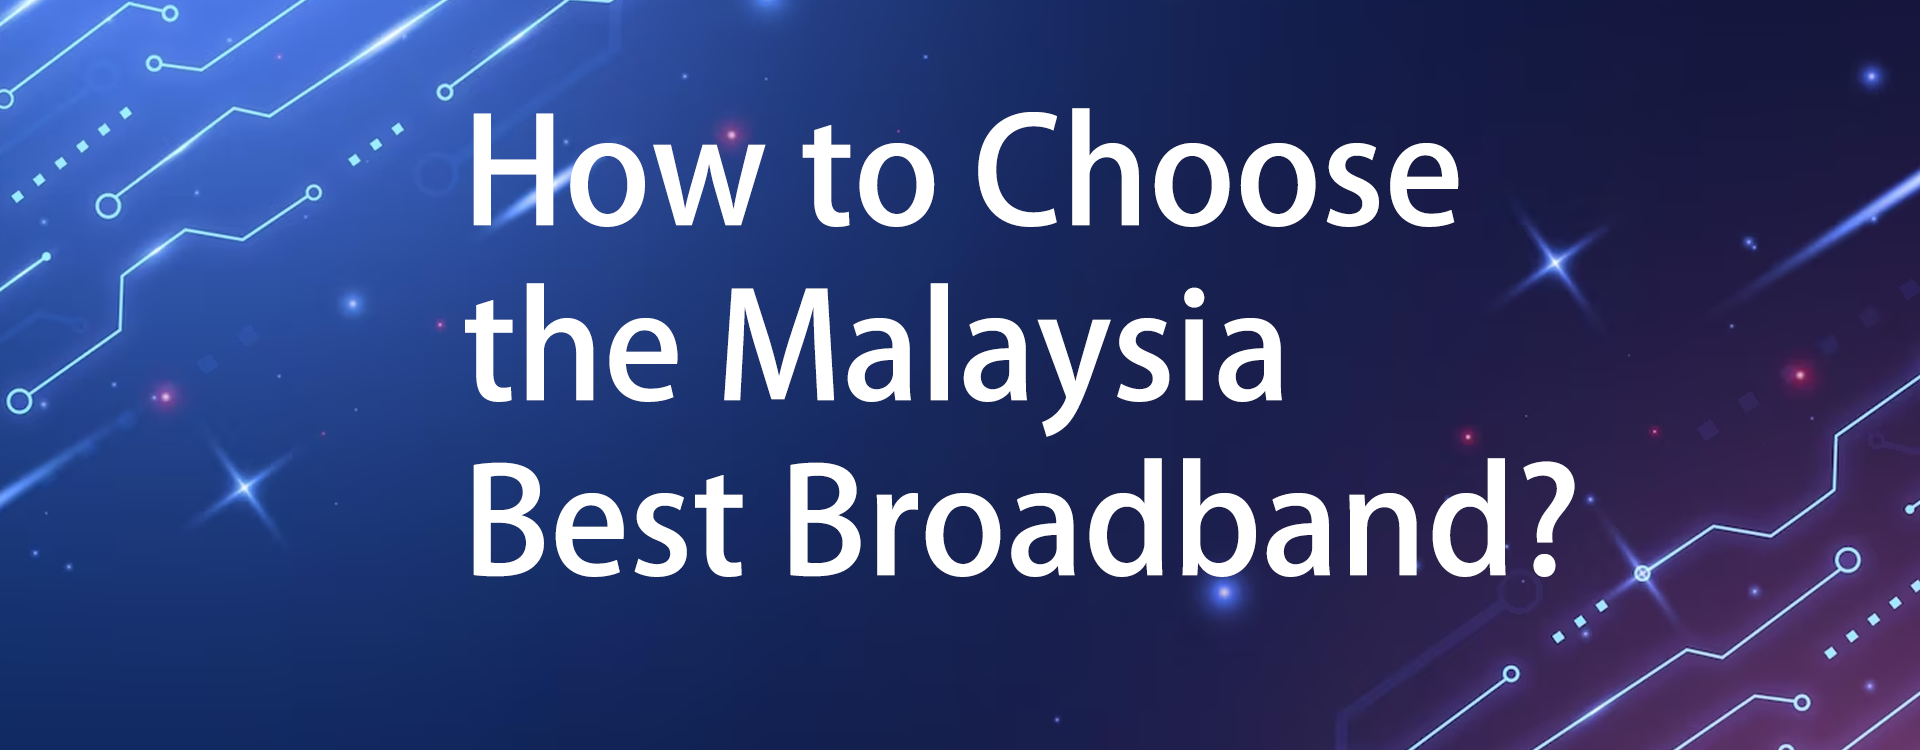 How-to-choose-the-malaysia-best-broadband